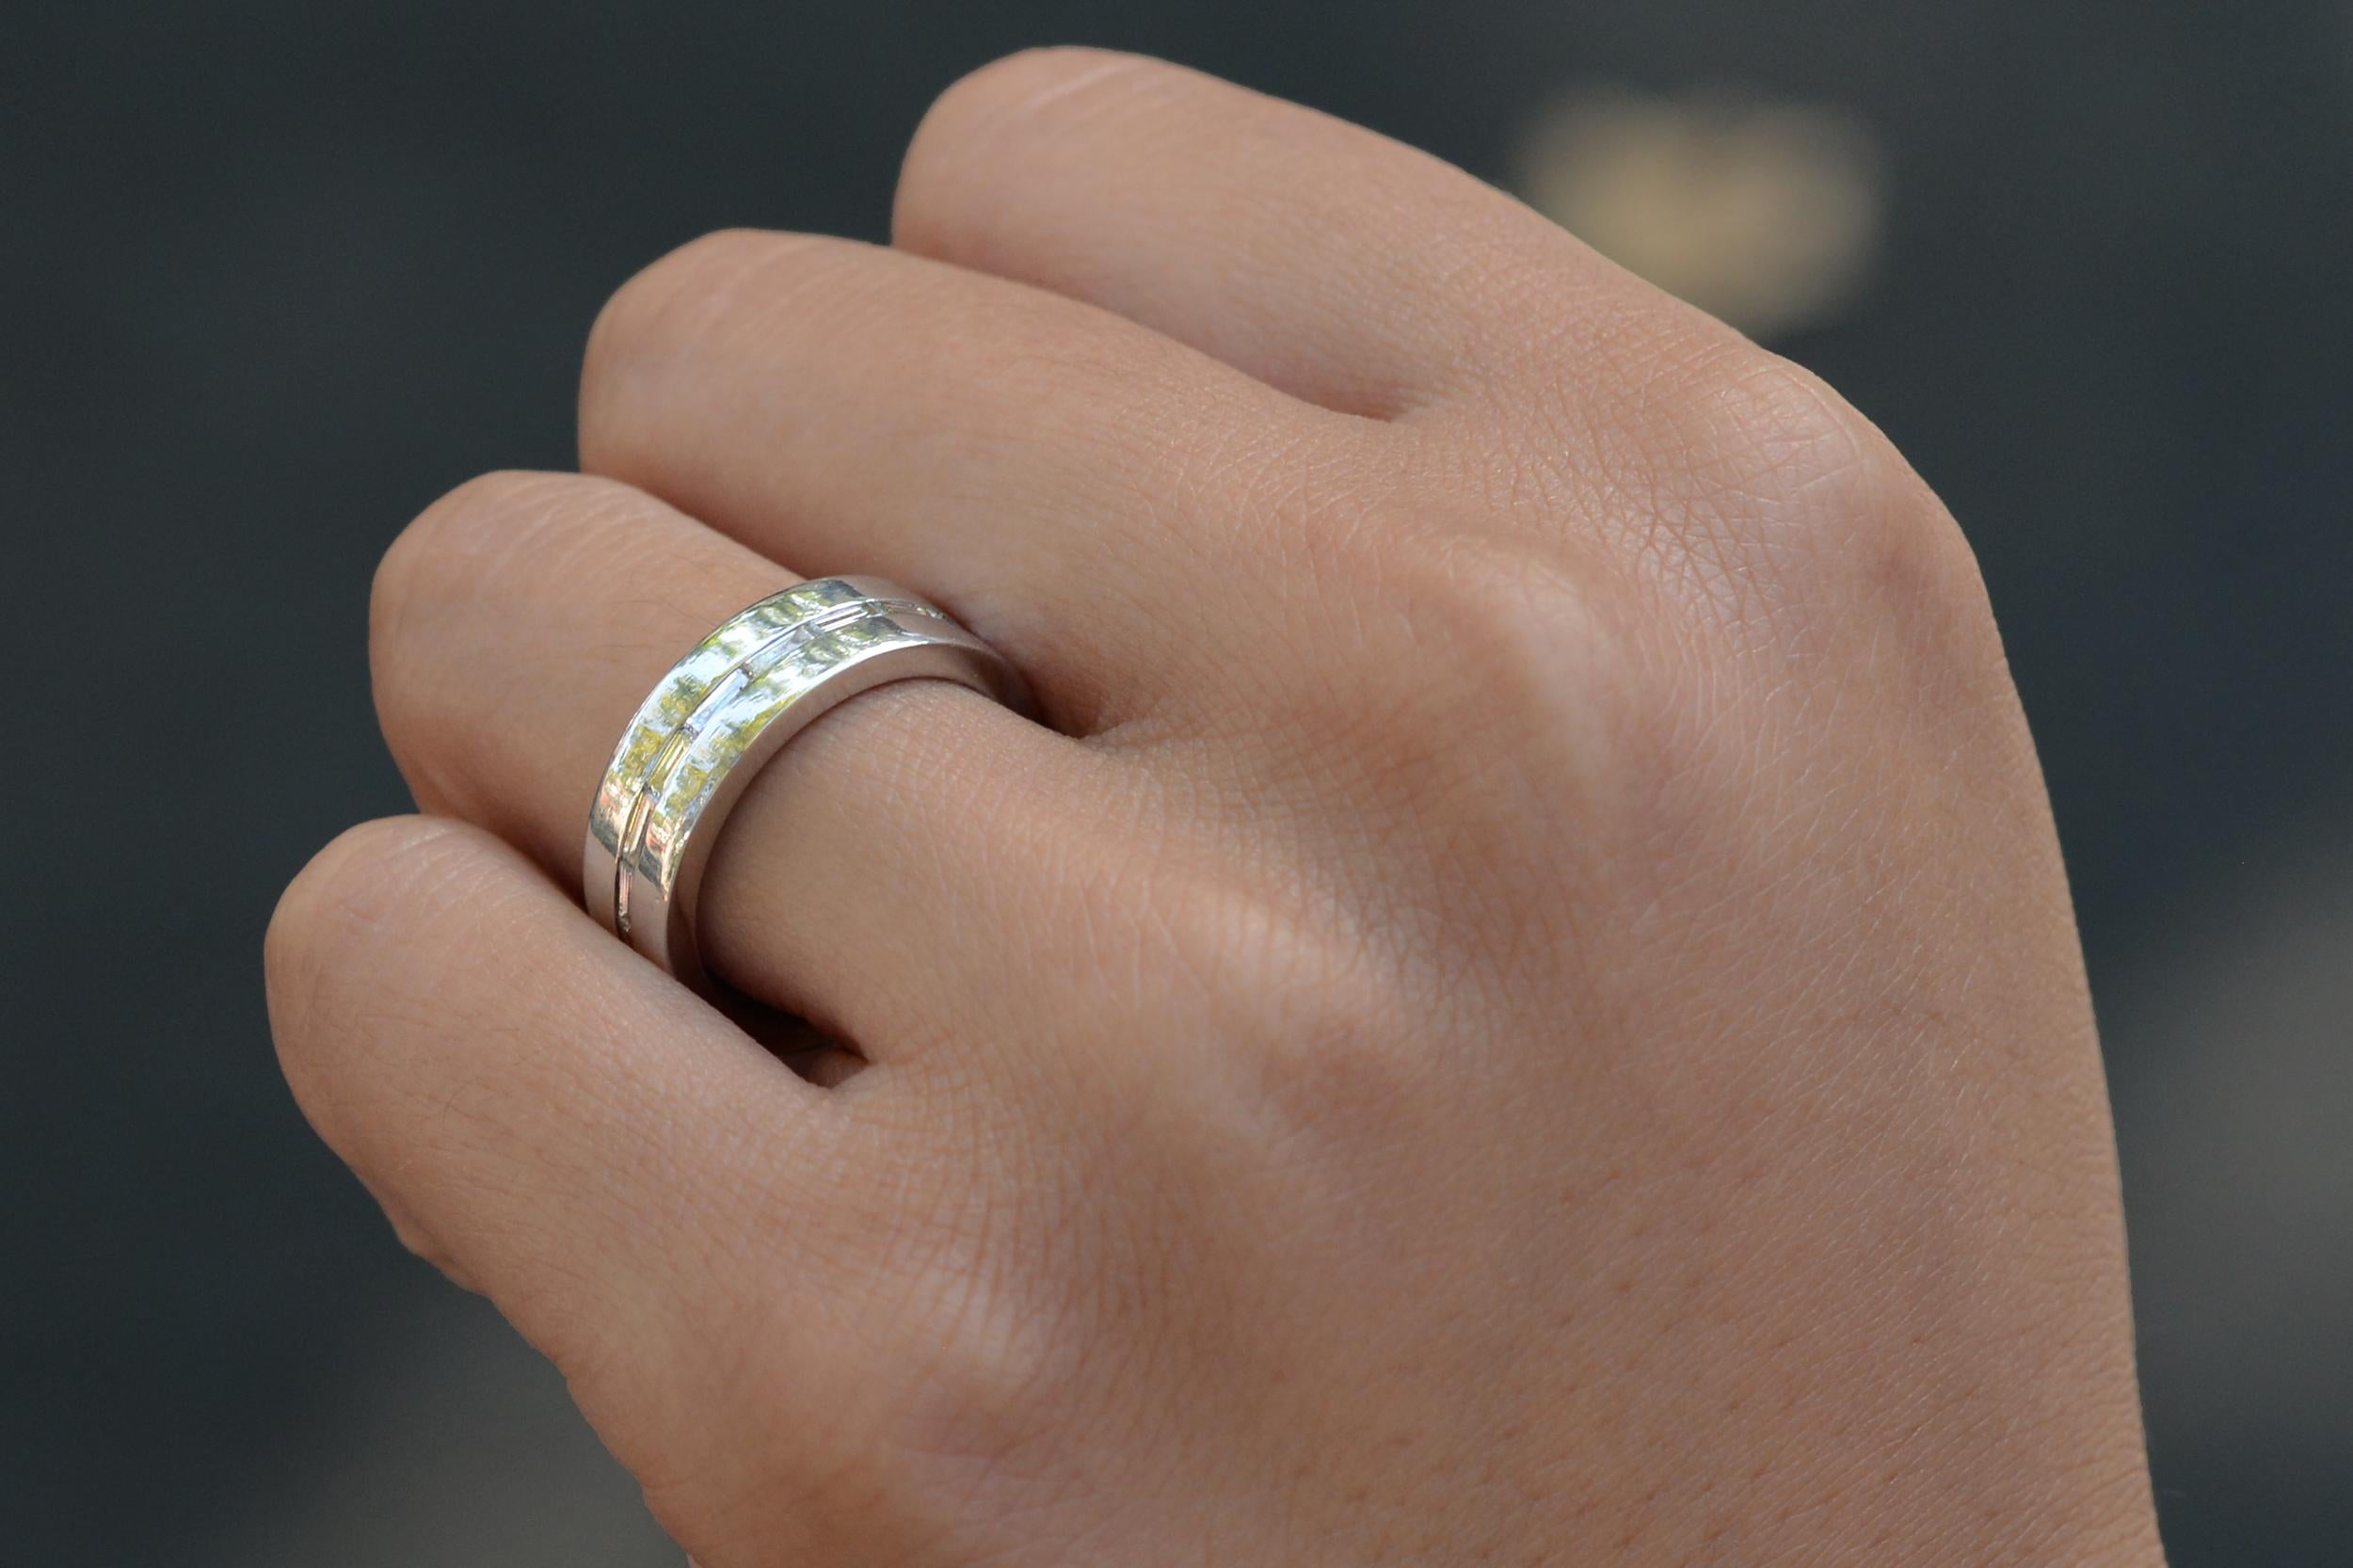 A tasteful vintage wedding band ring, with streamlined baguette cut diamonds perfectly aligned around the 1/4